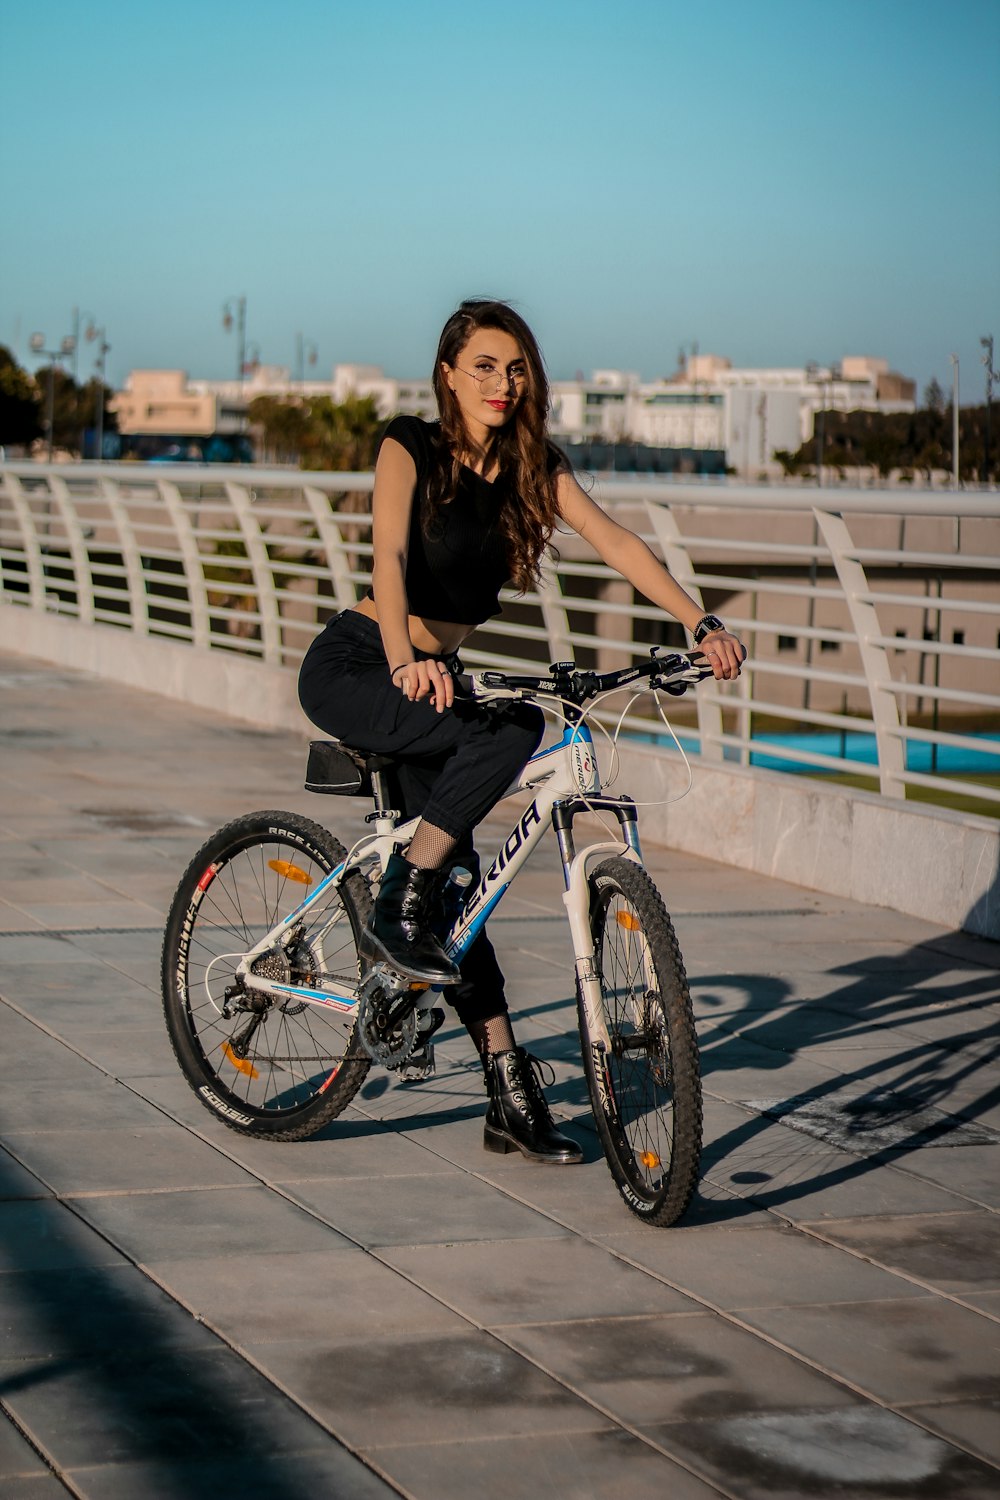 750+ Girls Bike Pictures | Download Free Images & Stock Photos on Unsplash